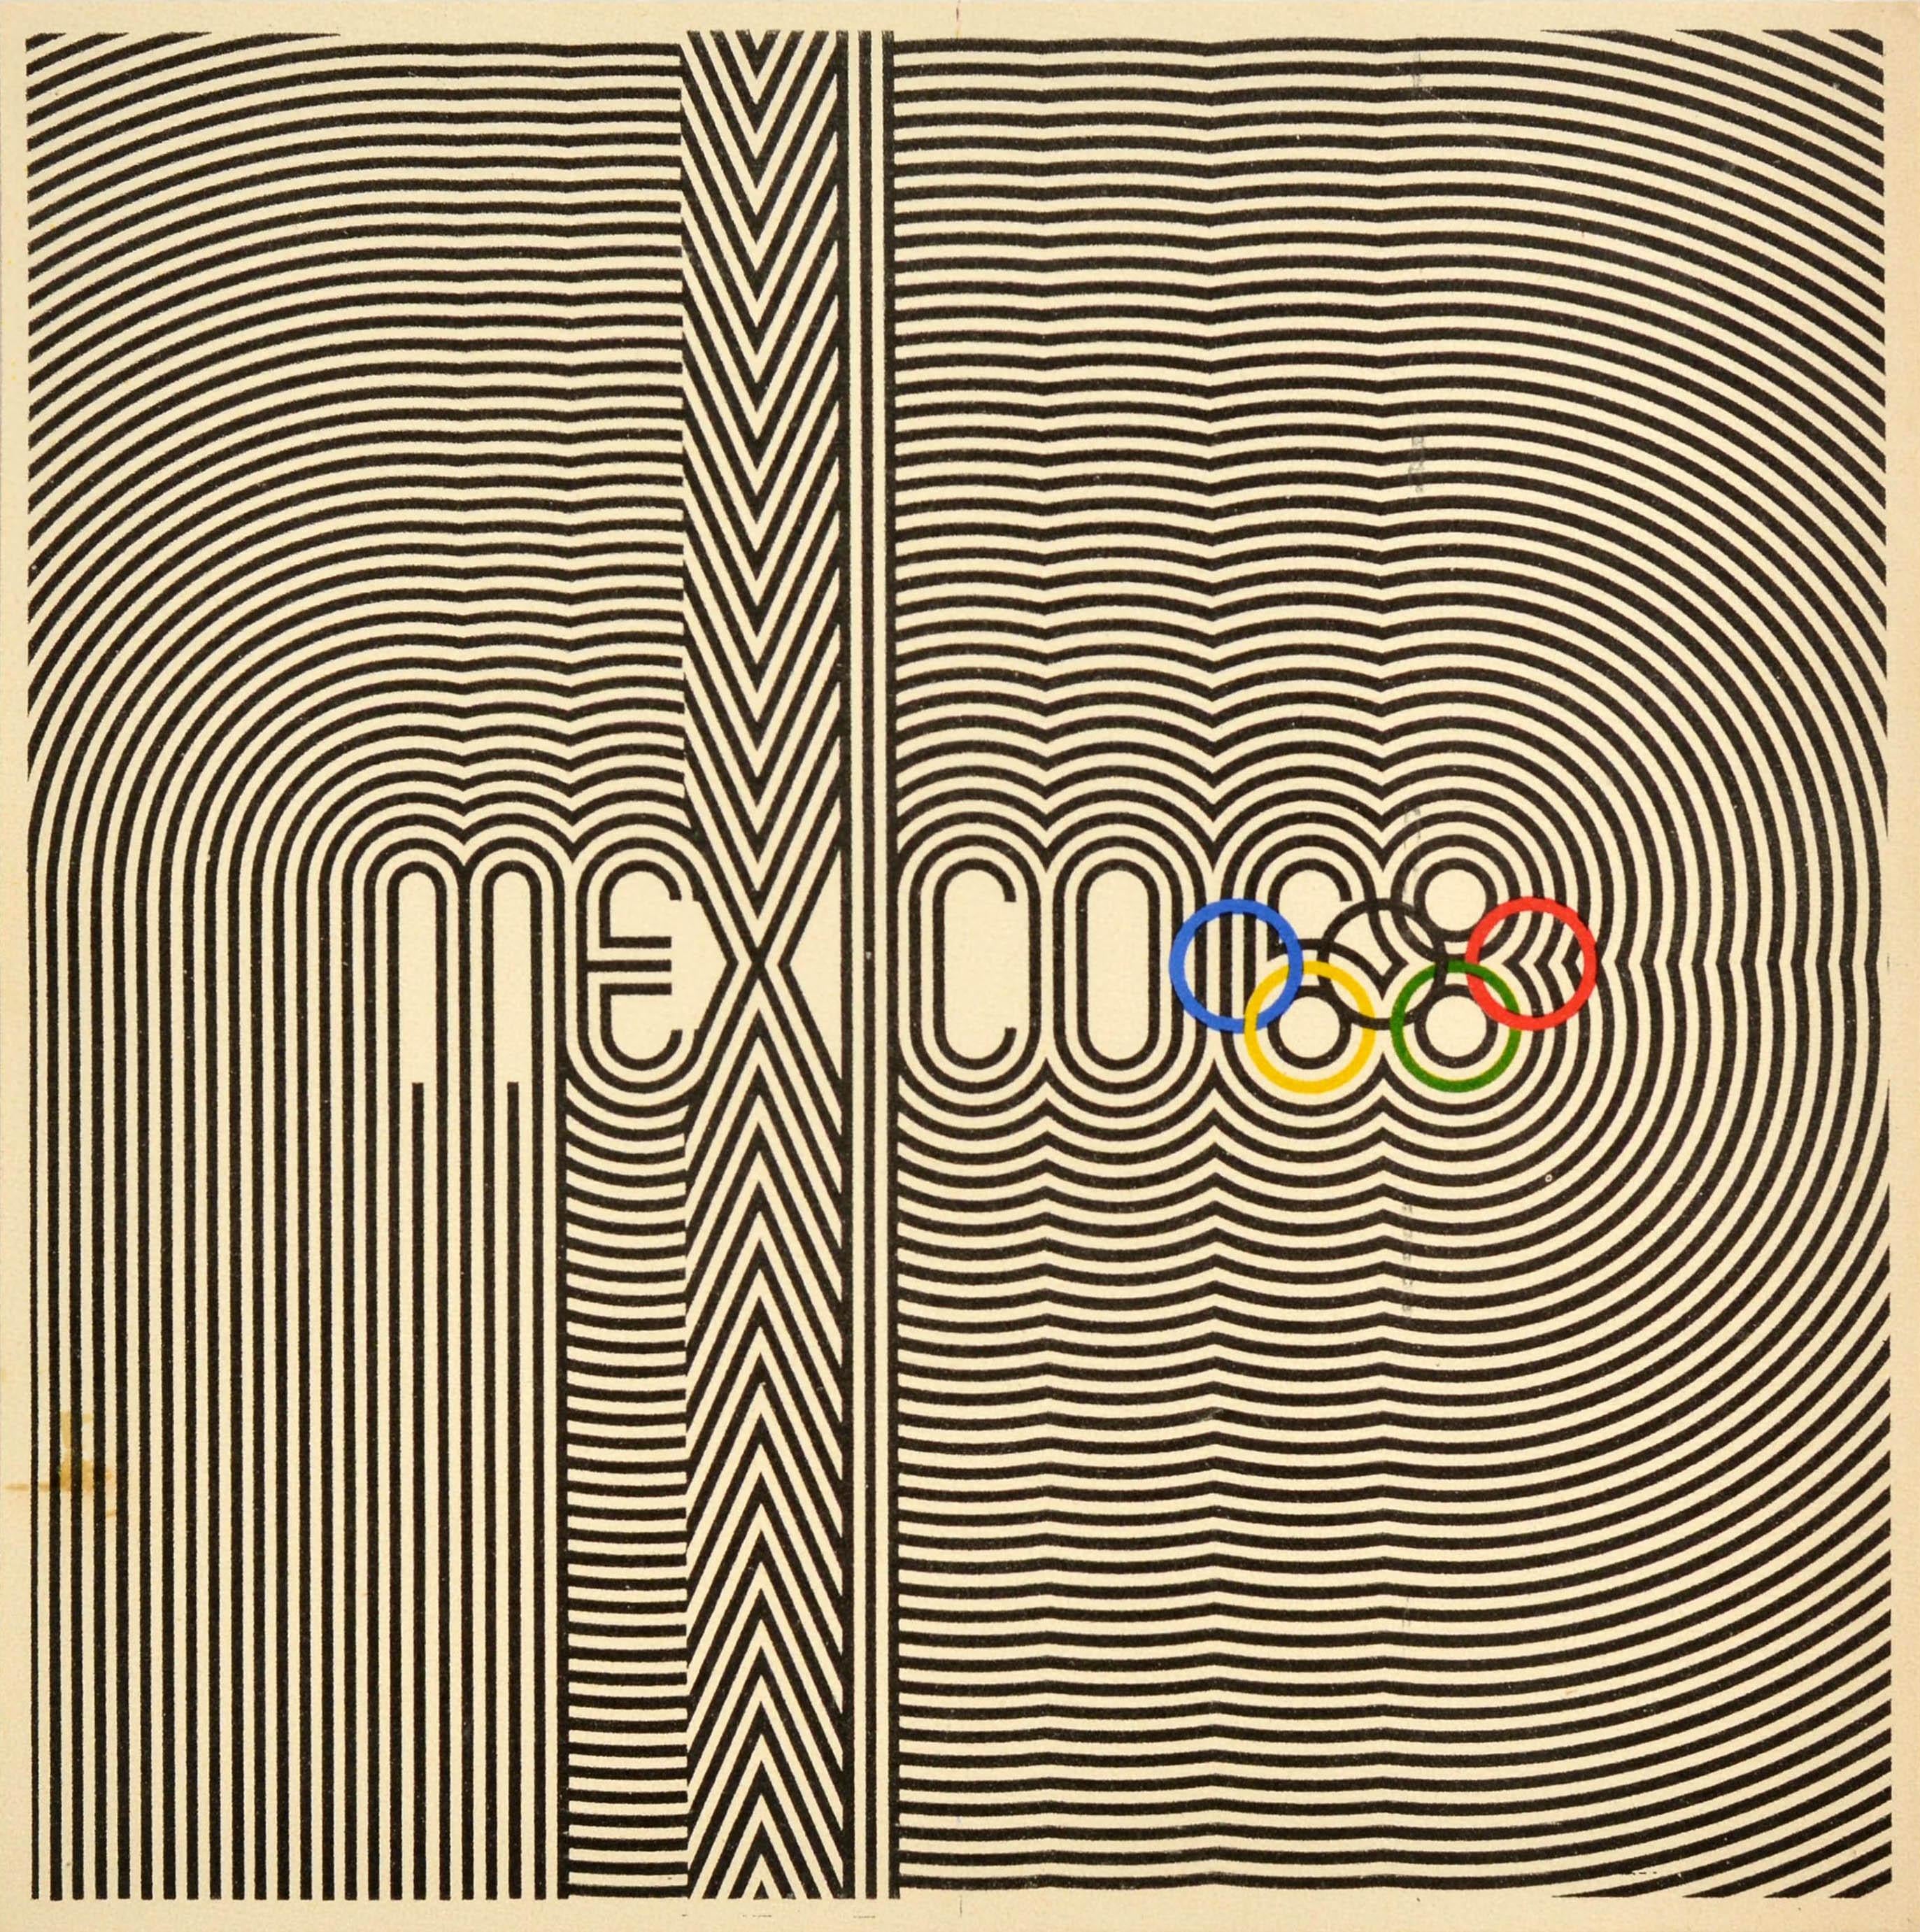 Original vintage sport poster for 1968 Mexico Olympic Games officially known as the Games of the XIX Olympiad held from 12-27 October 1968, featuring the iconic eye-catching event logo design by the notable American graphic designer Lance Wyman (b.